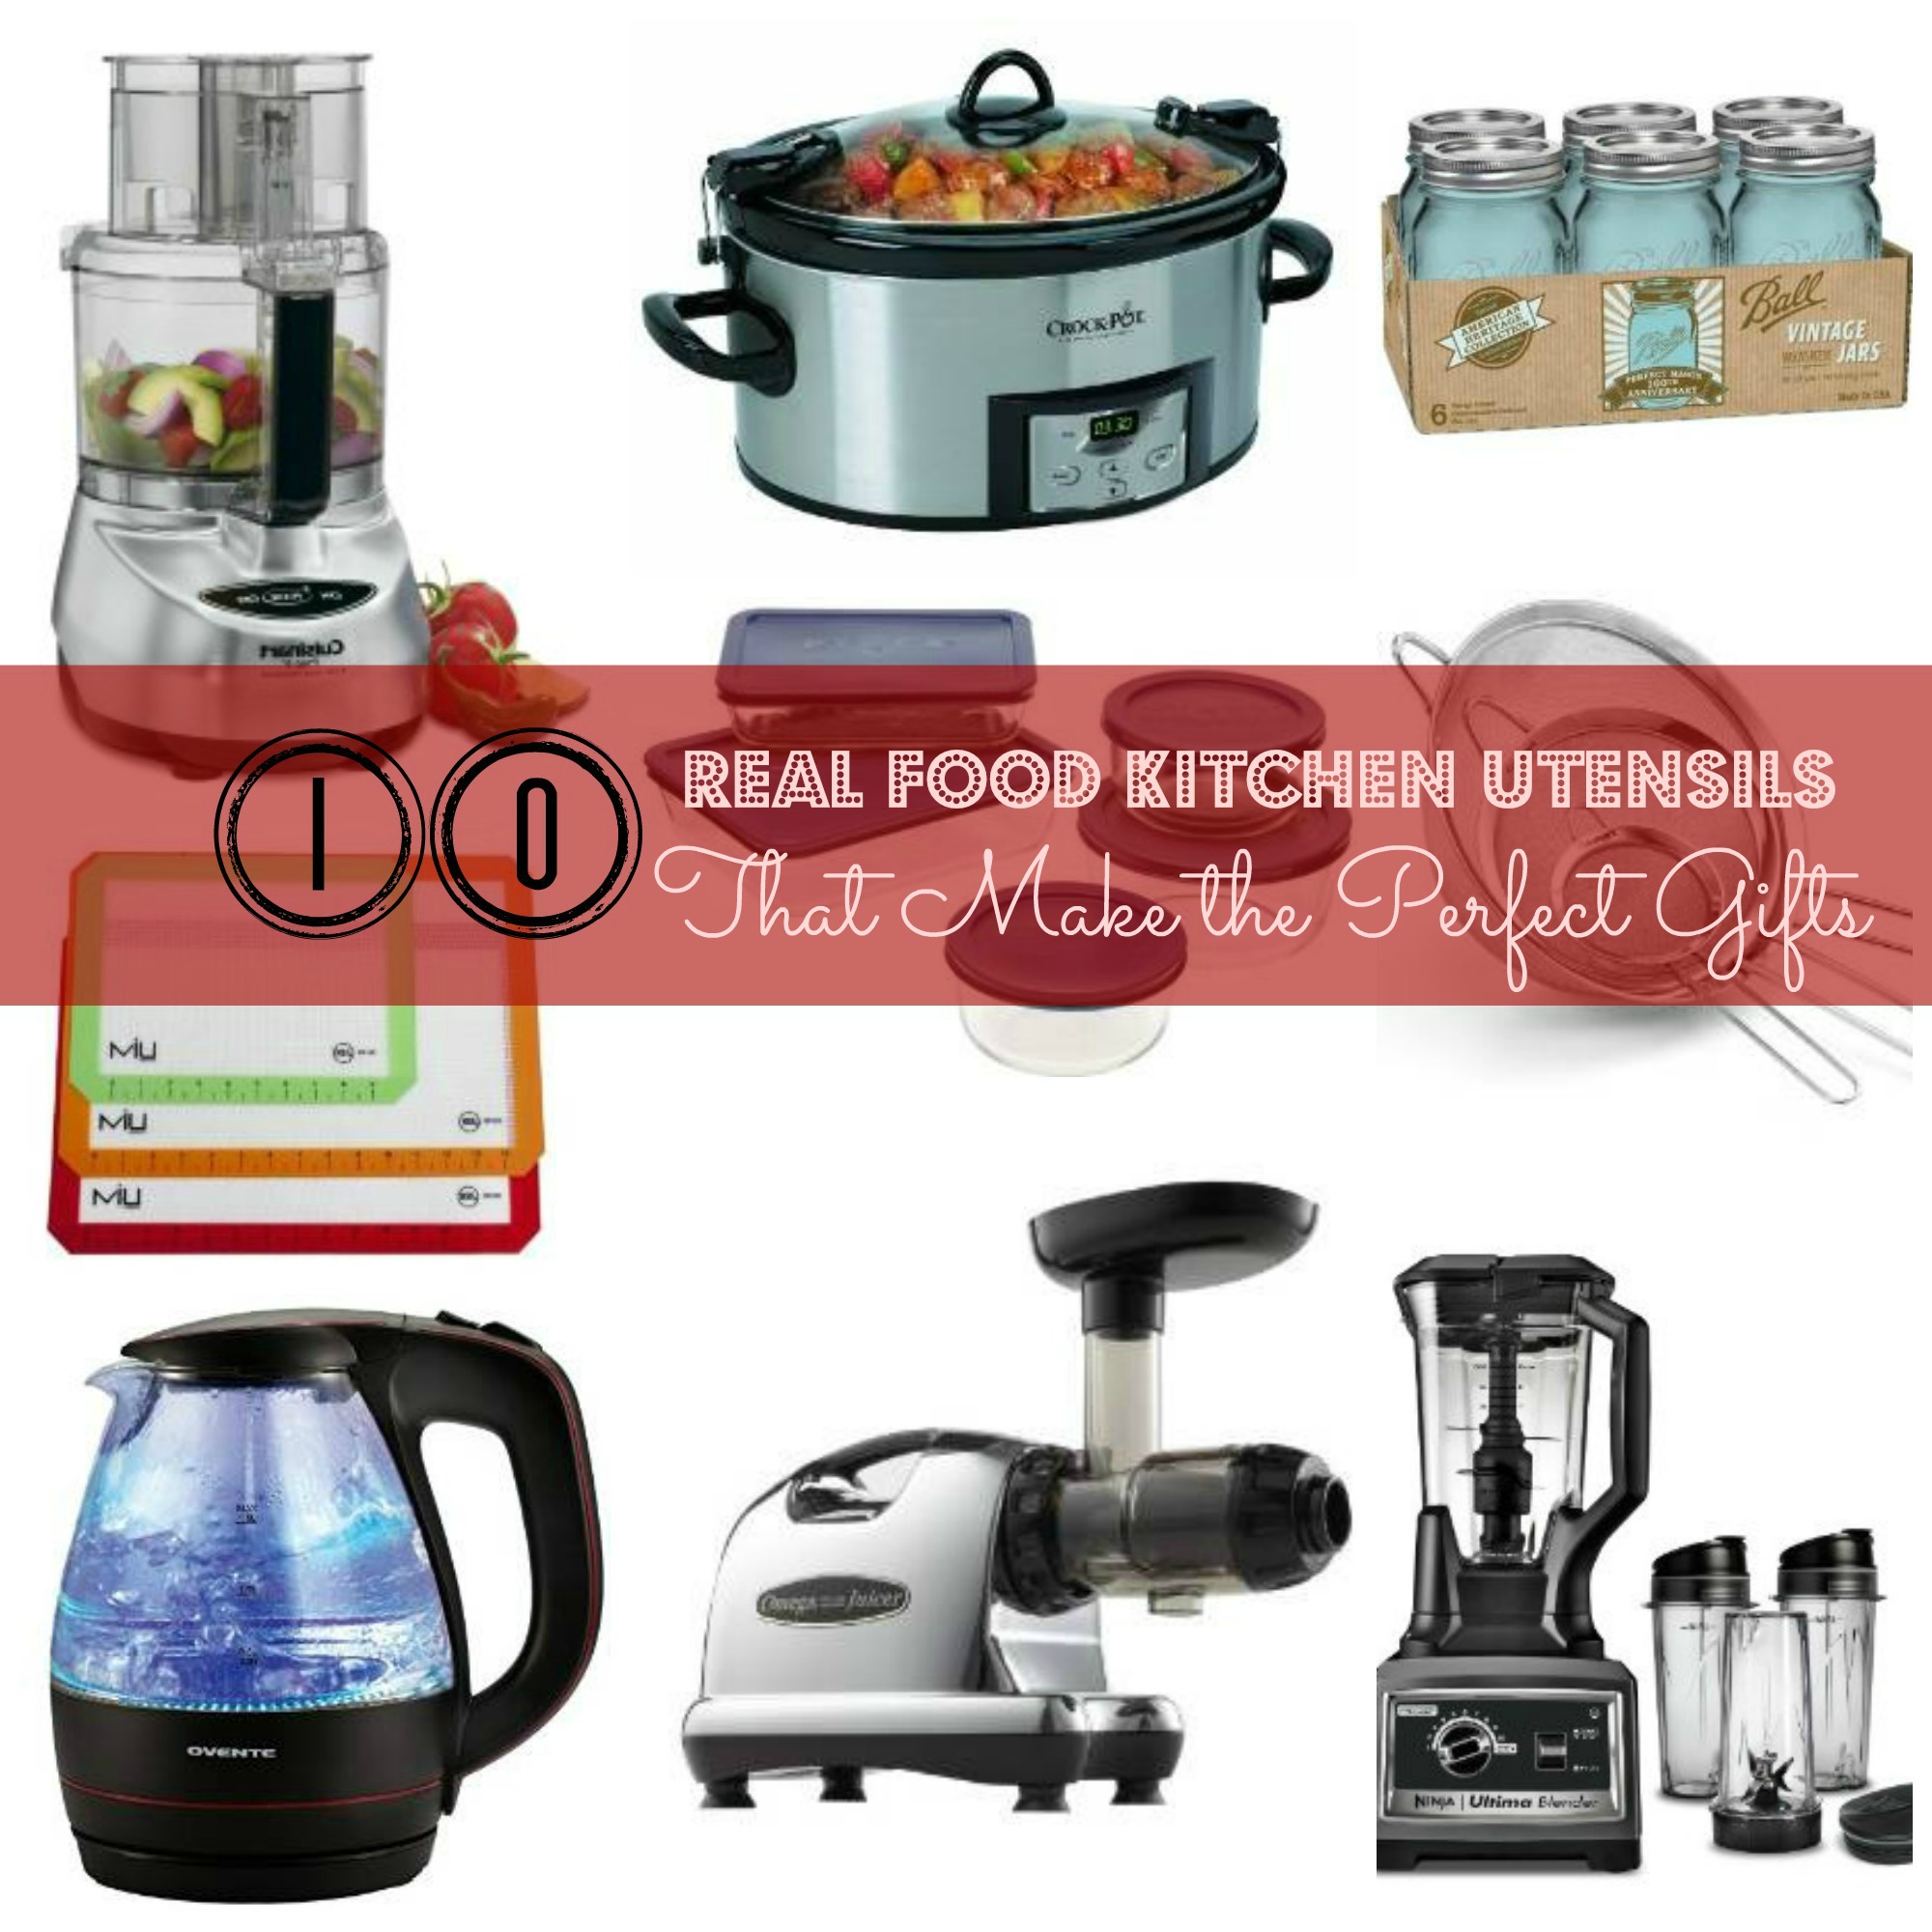 10 Real Food Kitchen Utensils (That Make Perfect Gifts) - The